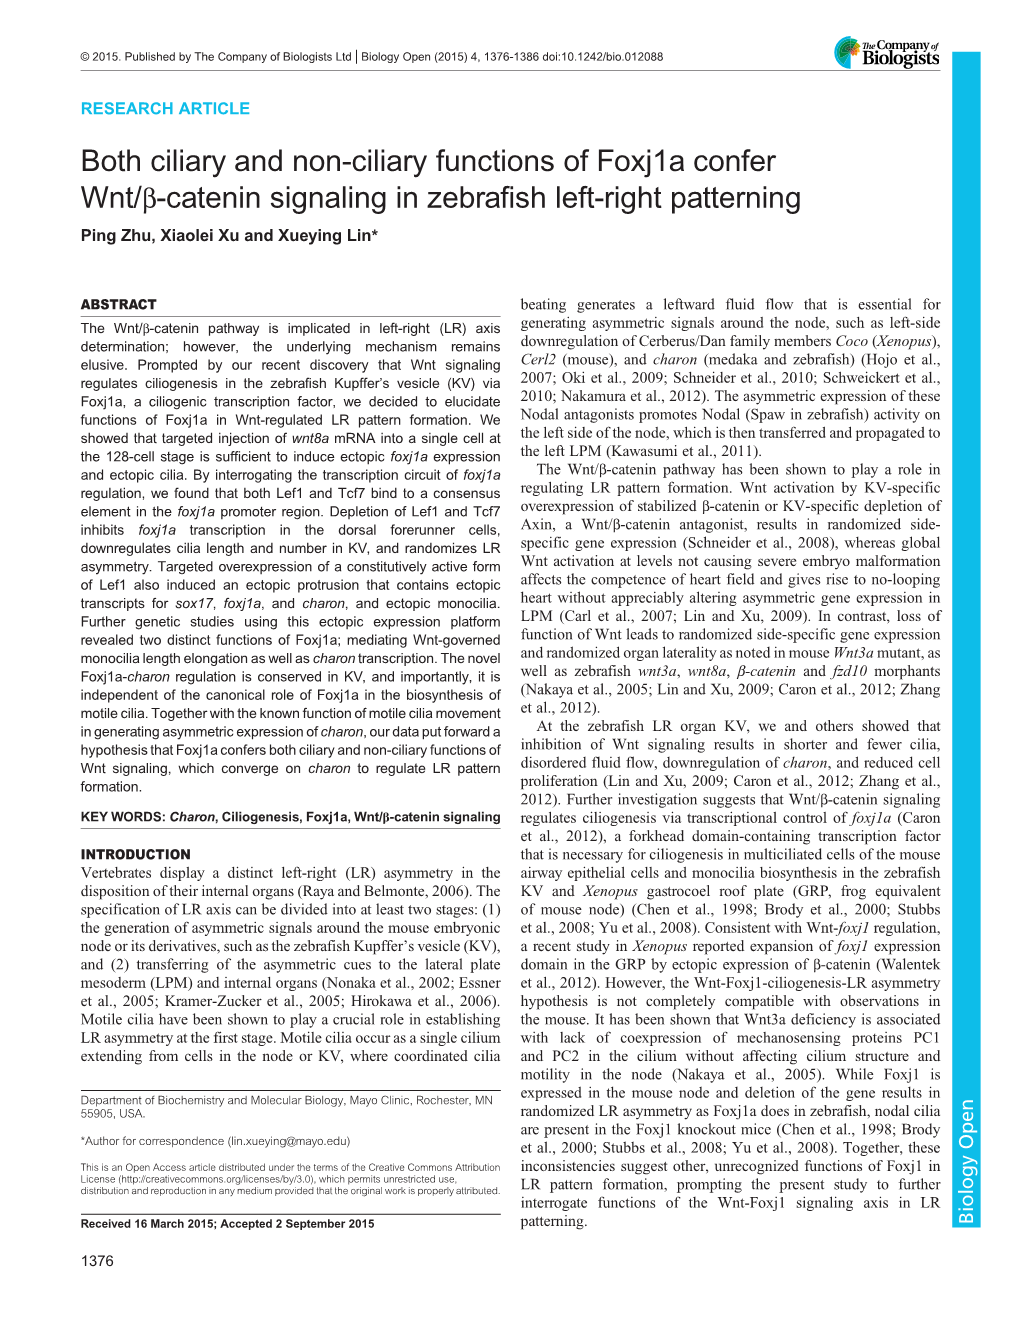 Both Ciliary and Non-Ciliary Functions of Foxj1a Confer Wnt/Β-Catenin Signaling in Zebrafish Left-Right Patterning Ping Zhu, Xiaolei Xu and Xueying Lin*